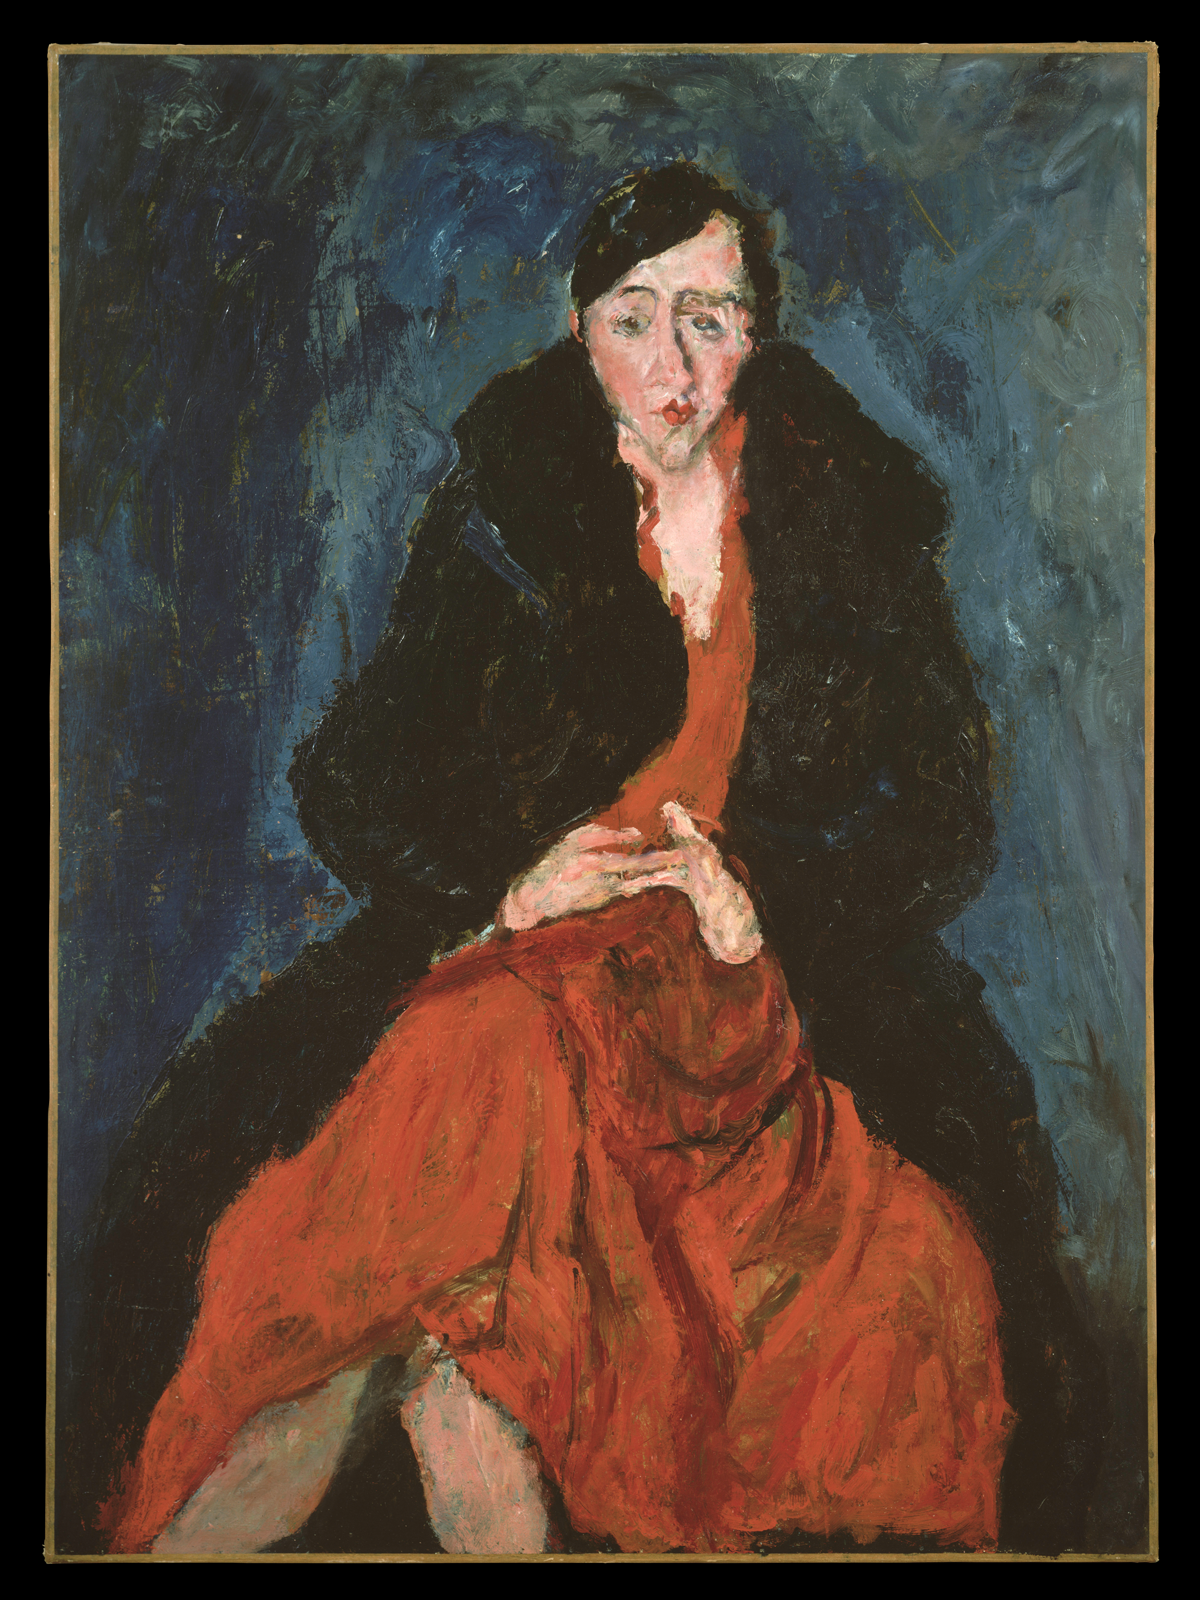 Portrait of the interior designer Madeleine Castaing by the French painter Chaïm Soutine.